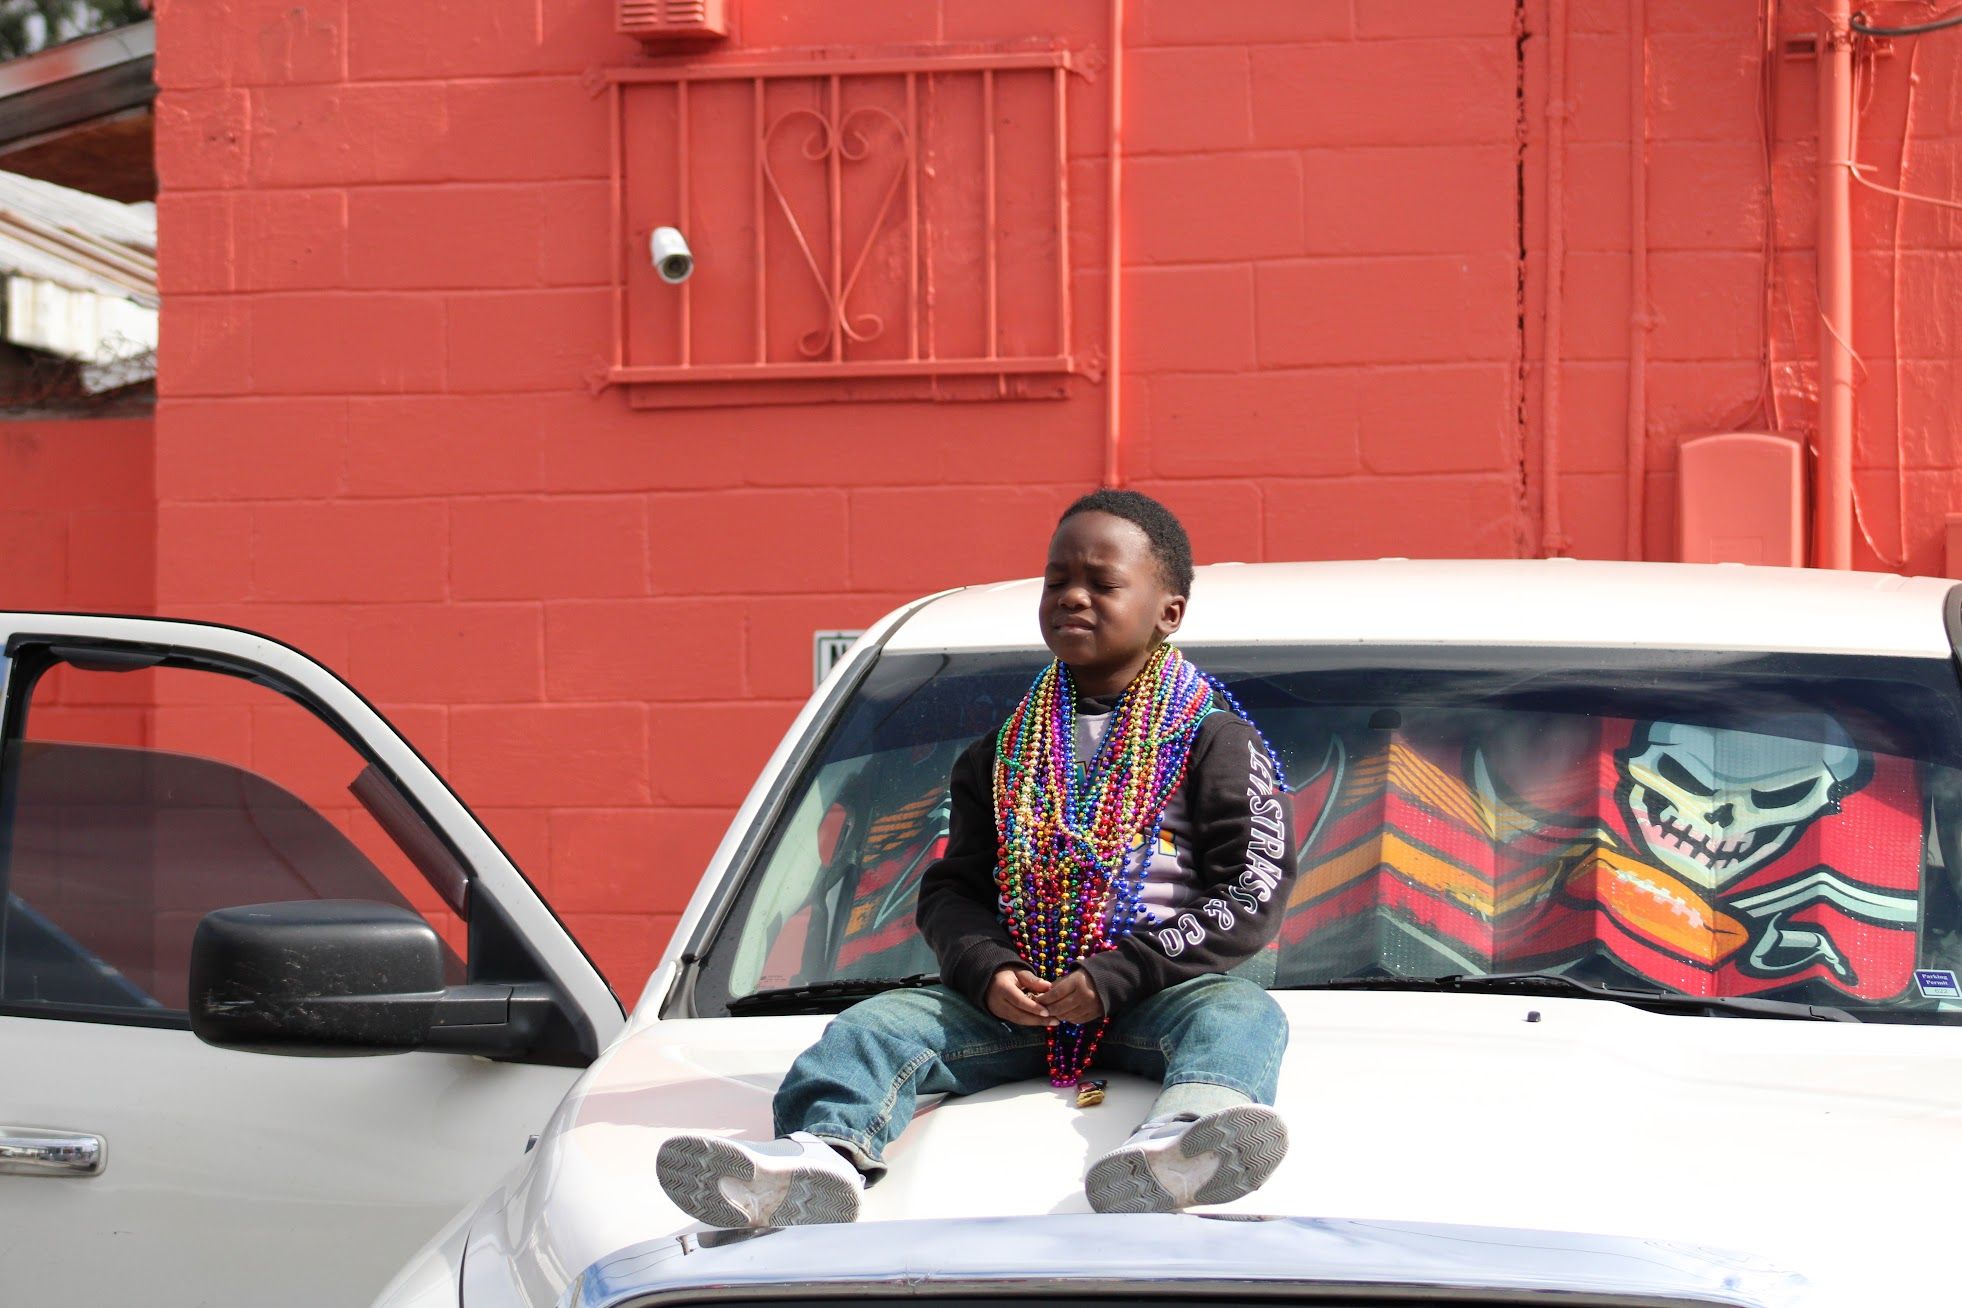 A boy sits on a car during Tampa's Martin Luther King Day Parade.